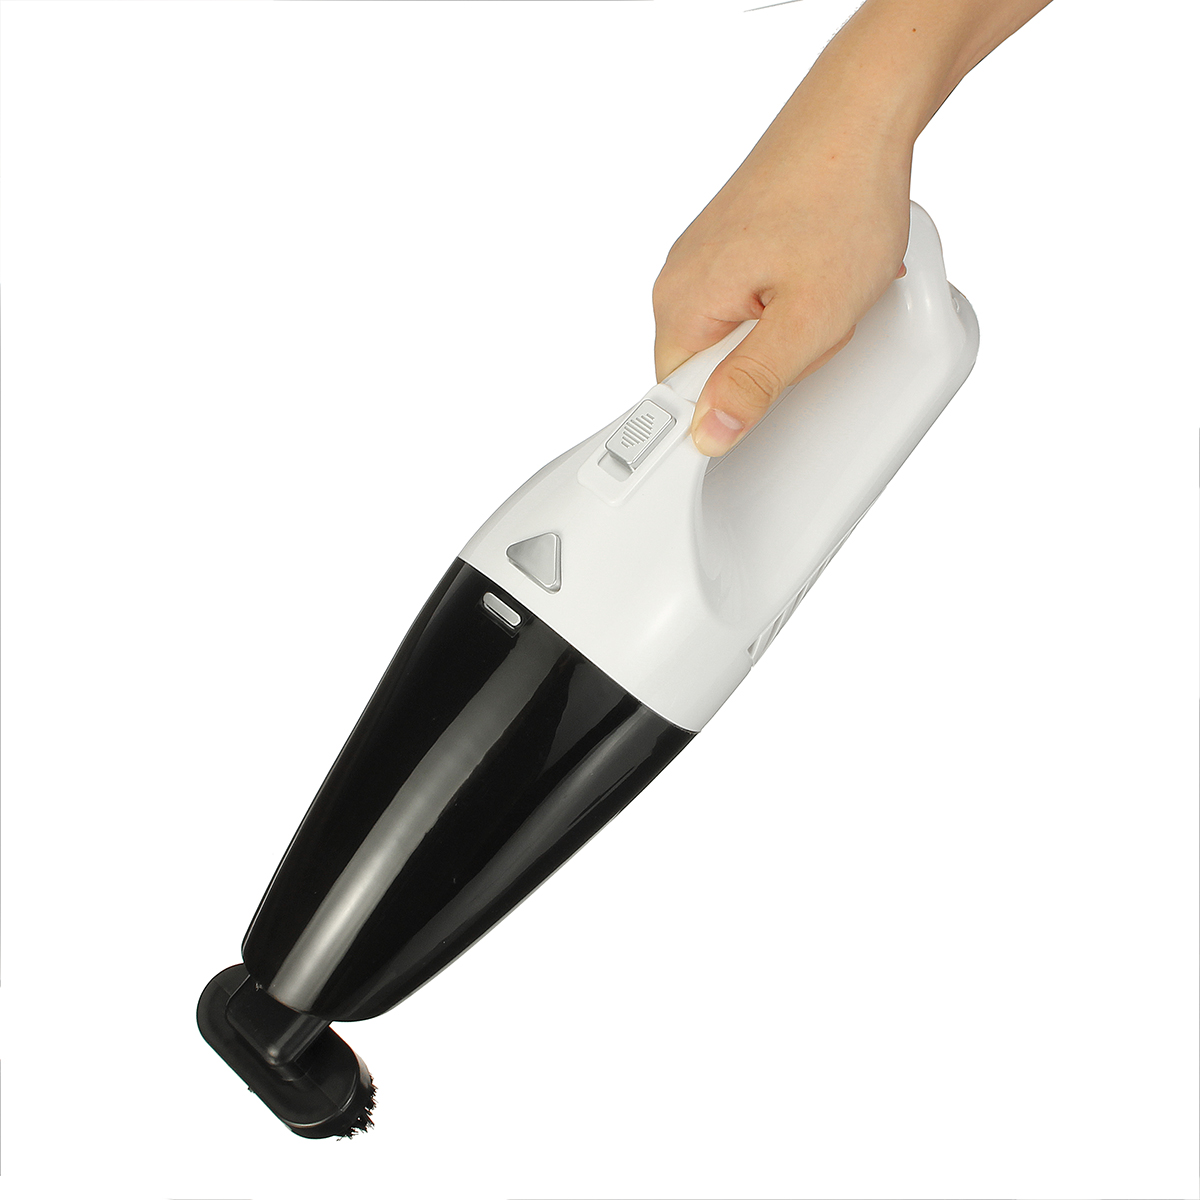 12V 120W Handheld Car/Home Vacuum Cleaner 6Kpa Strong Suction Power